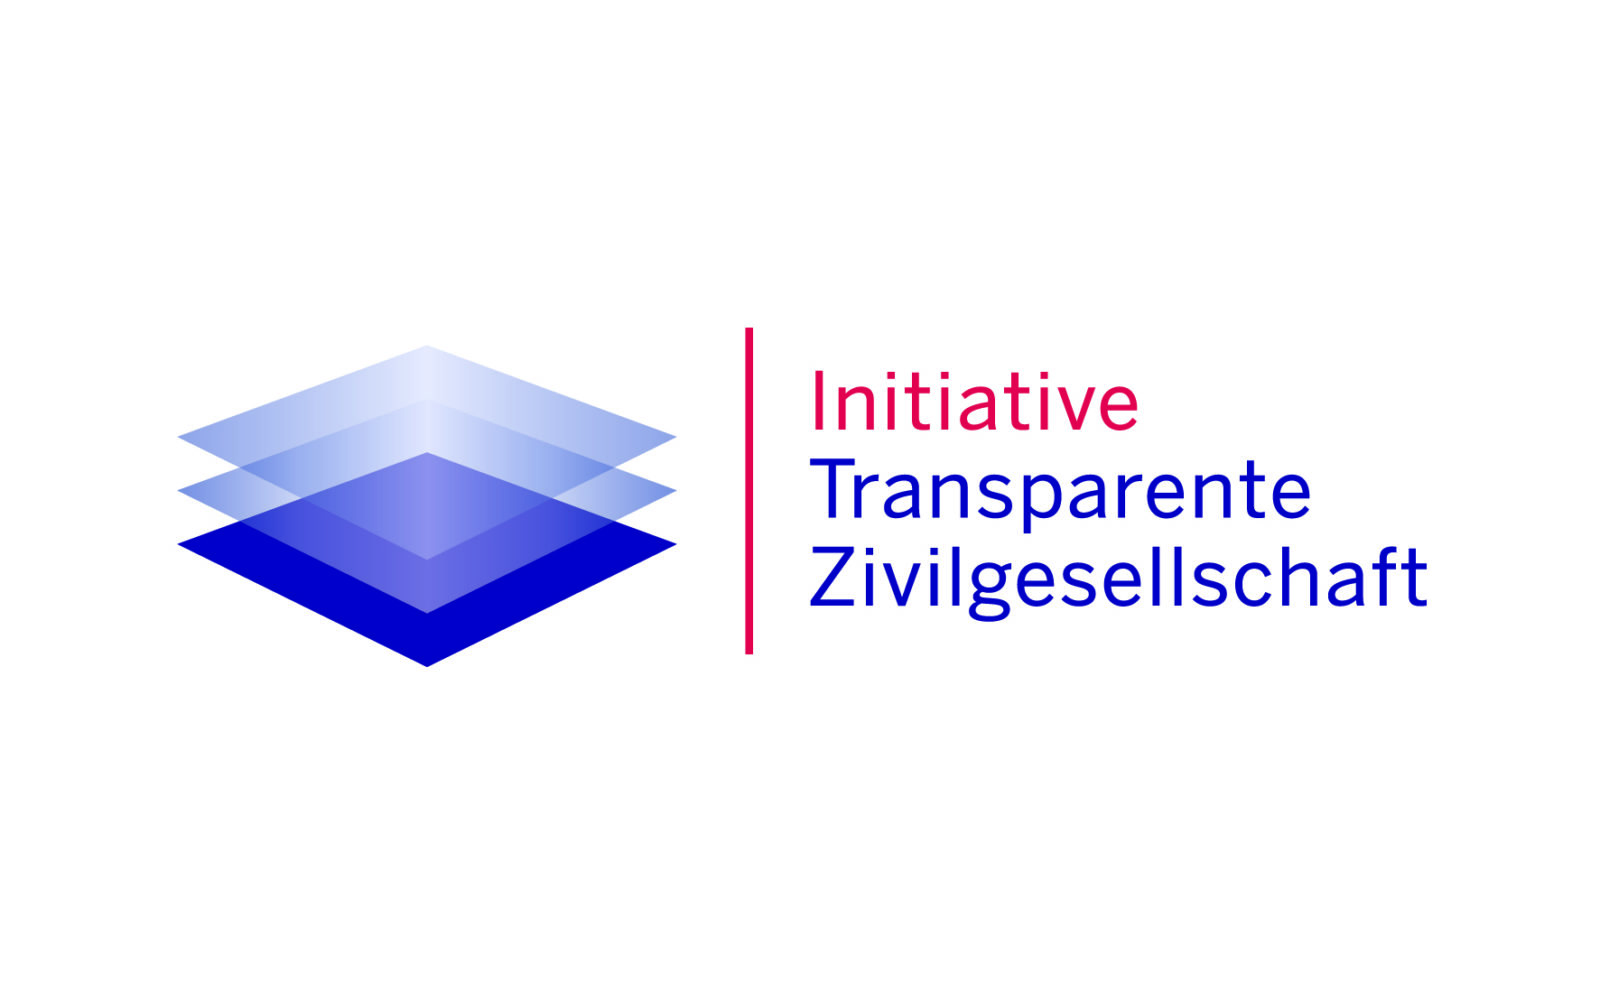 Vision Hope International joins the Transparent Civil Society Initiative